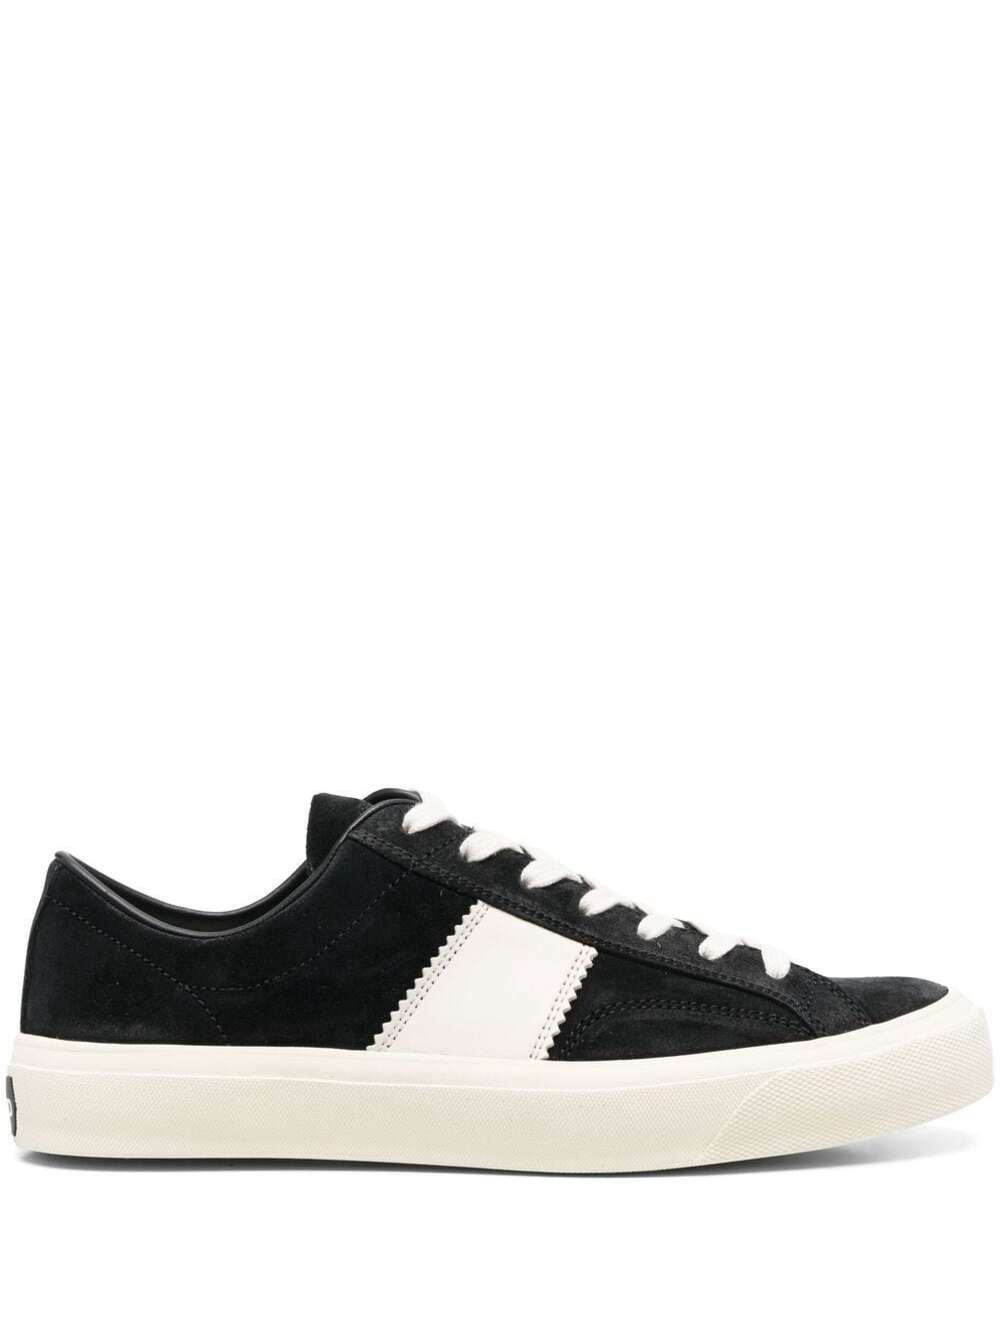 TOM FORD BLACK LOW TOP SNEAKERS WITH SUEDE INSERT MAN